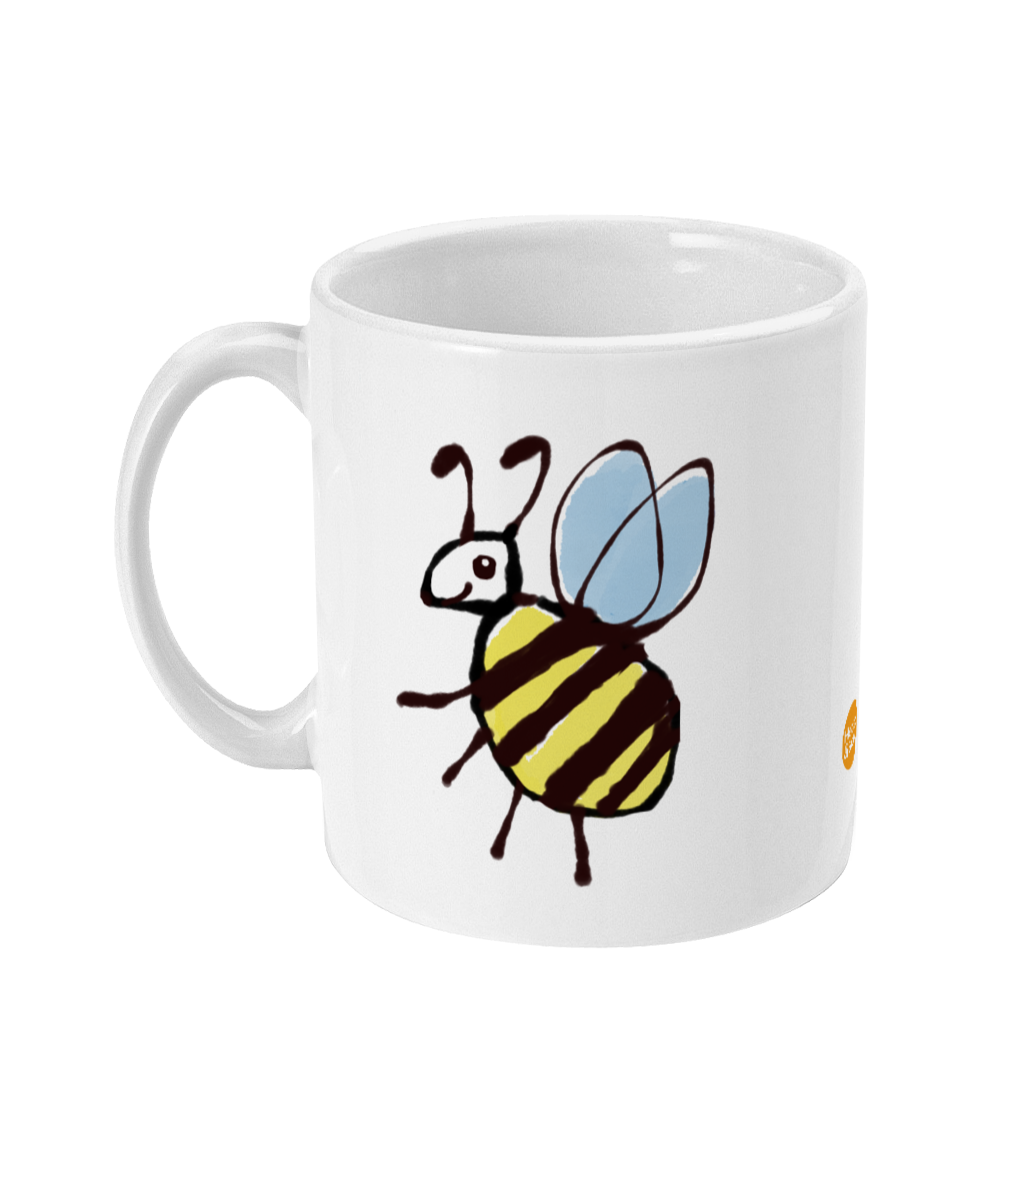 Cute Busy Bee design coffee mug by Hector and Bone Left View